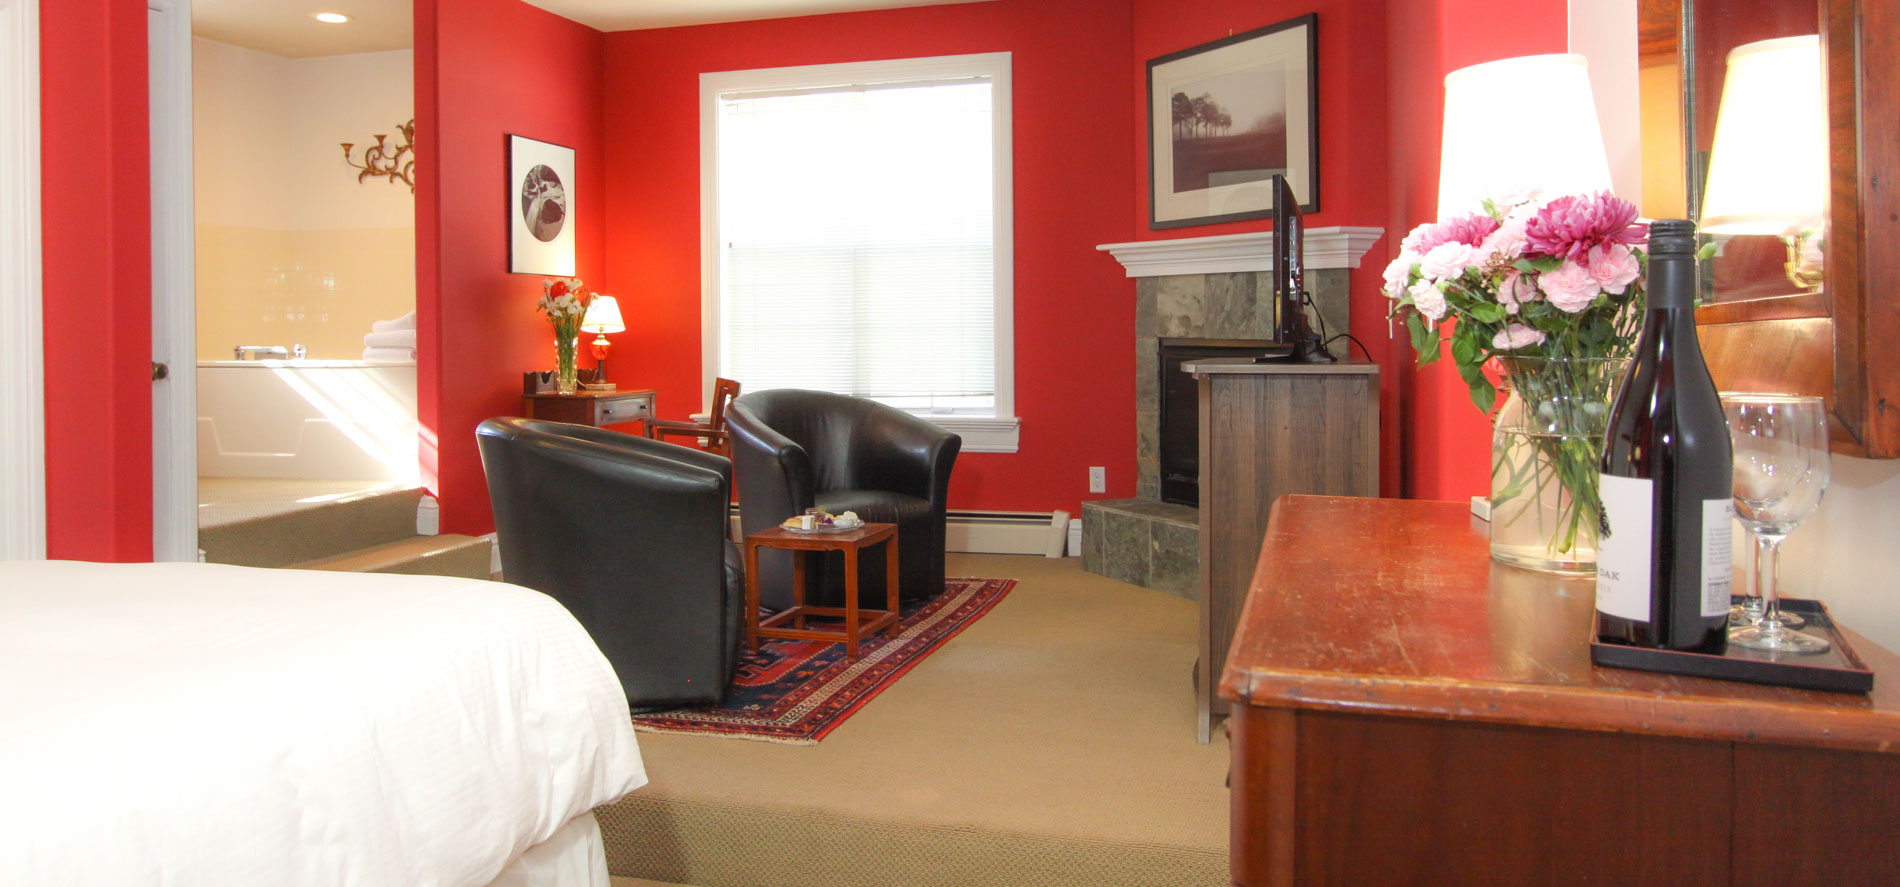 ruby with bed, chairs, spa tub and fireplace